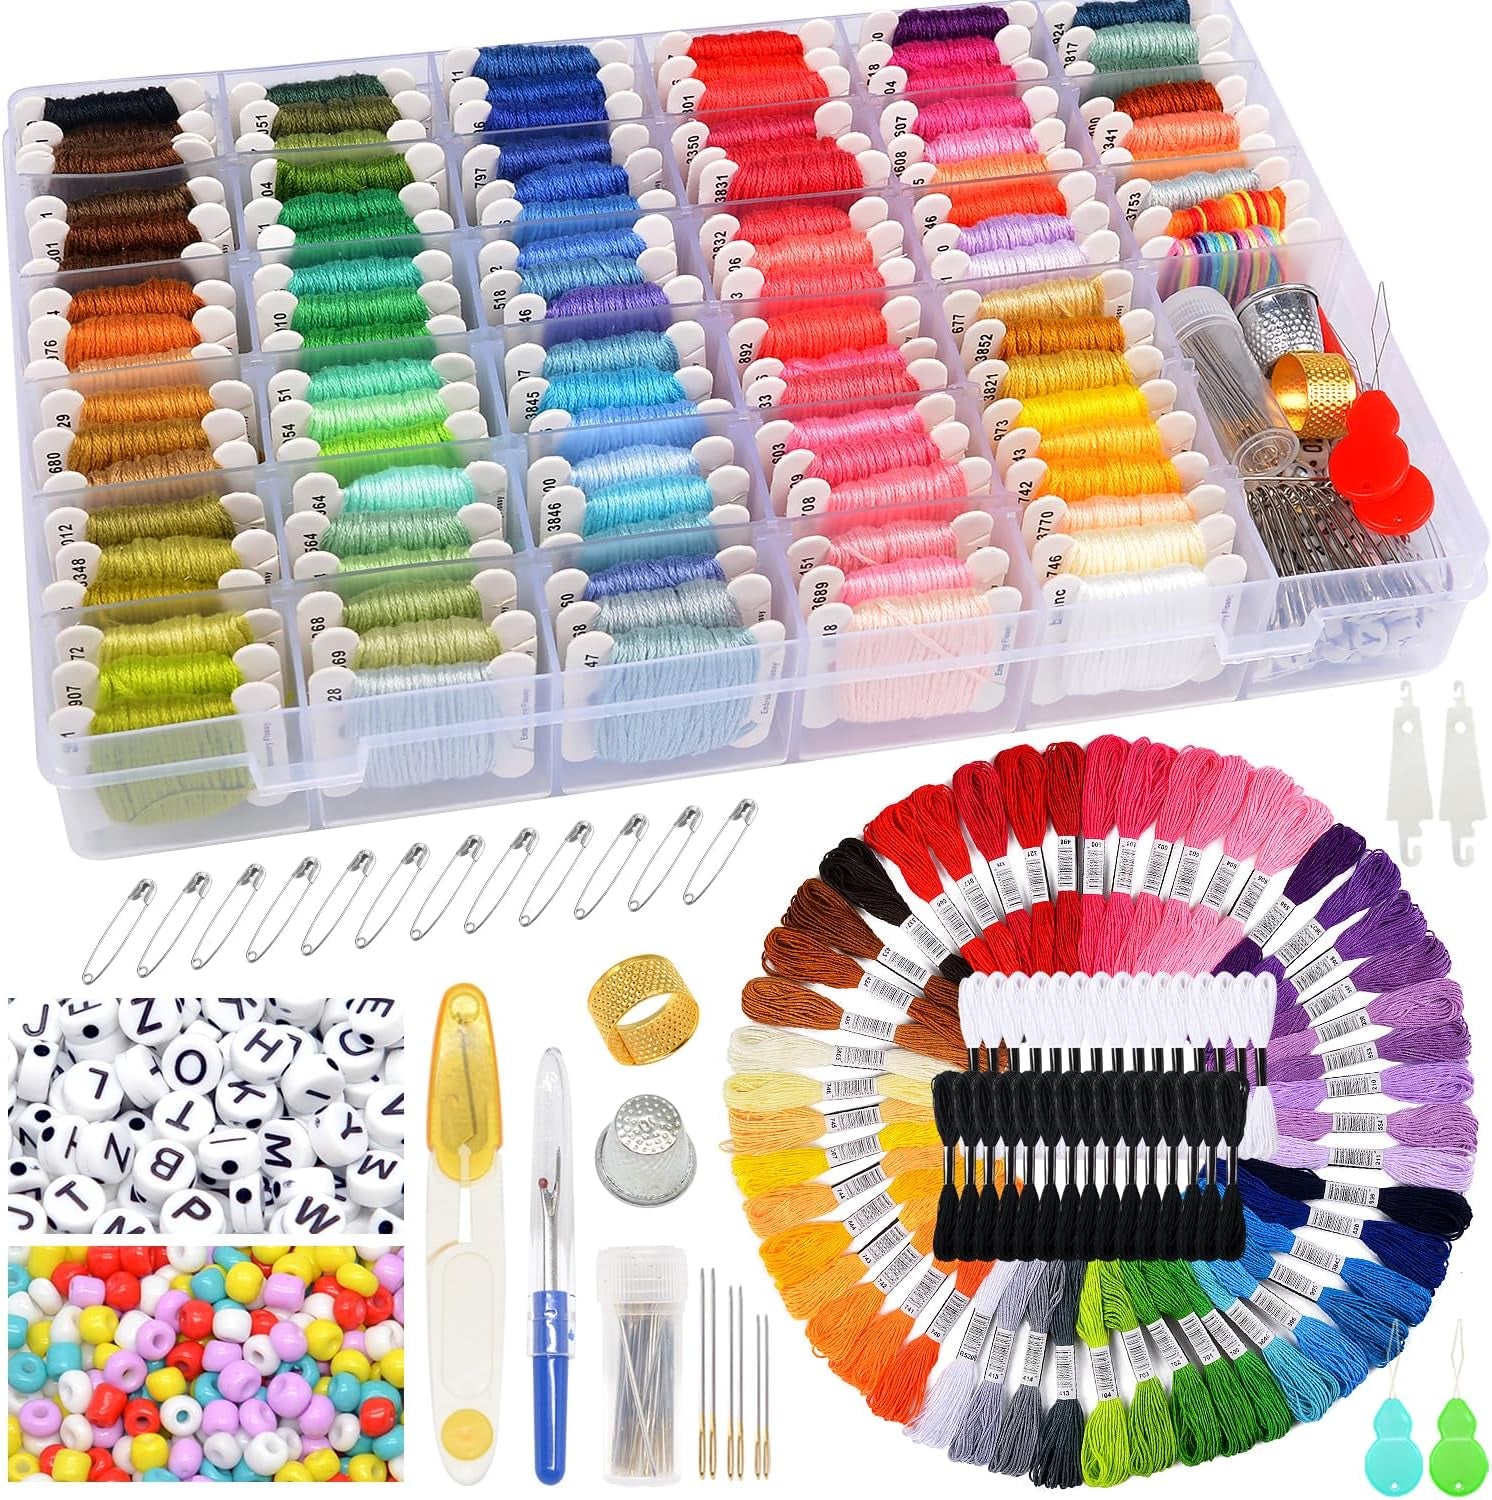 Friendship Bracelet String Kits with Organizer Storage Box, 110 Colors Embroidery Floss 52Pcs Cross Stitch Tools-Labeled with Embroidery Thread Numbers for Bobbins Great Production Gift